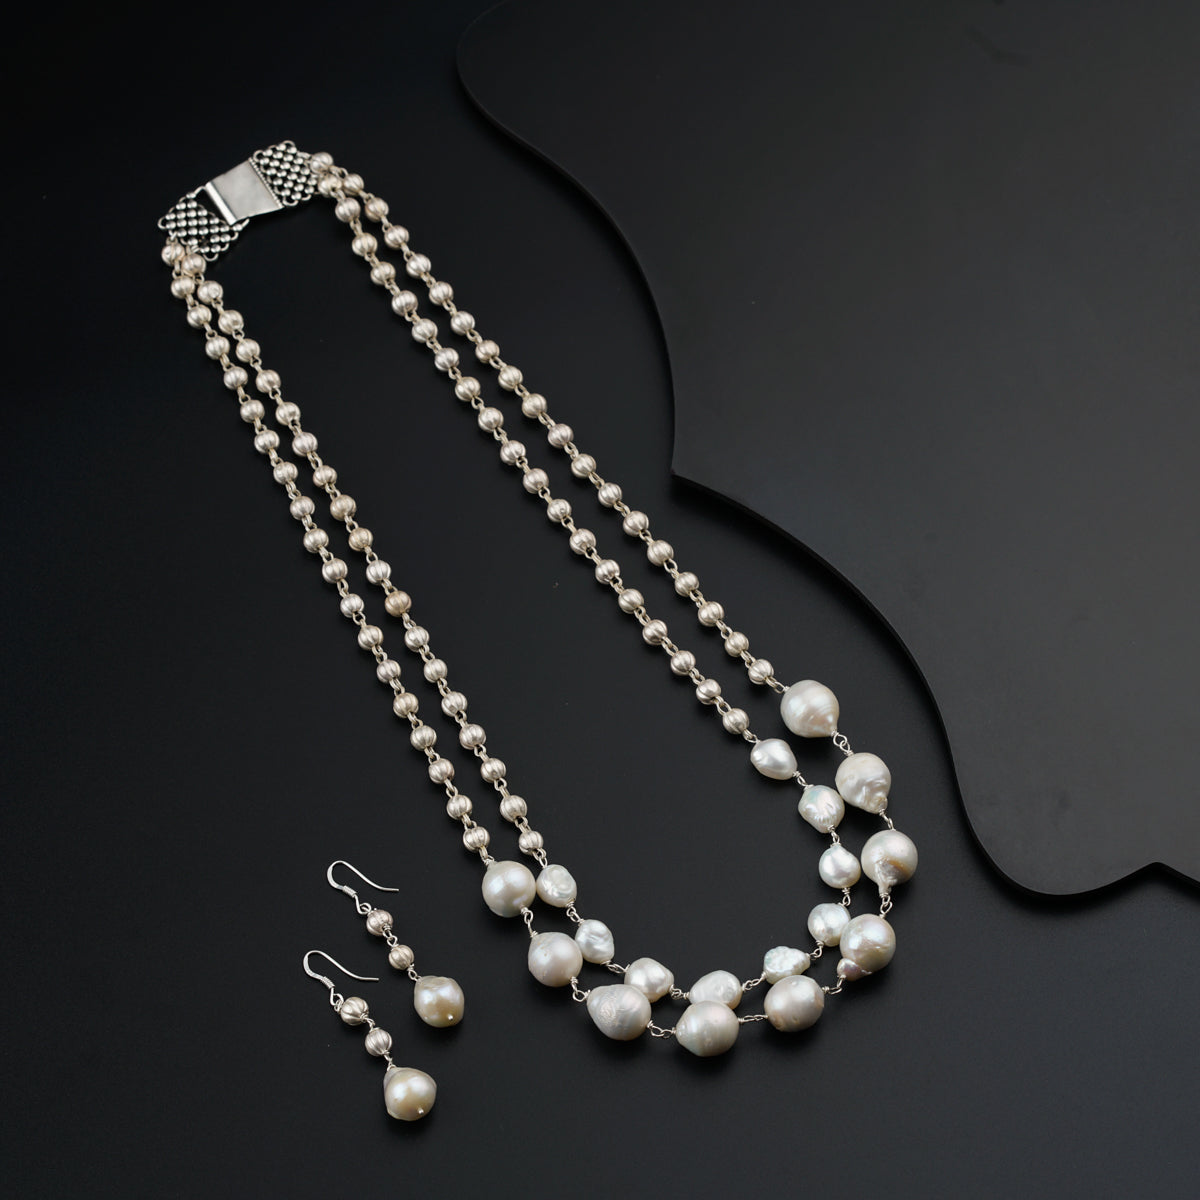 Silver set with double layered pearls and mohanmaal